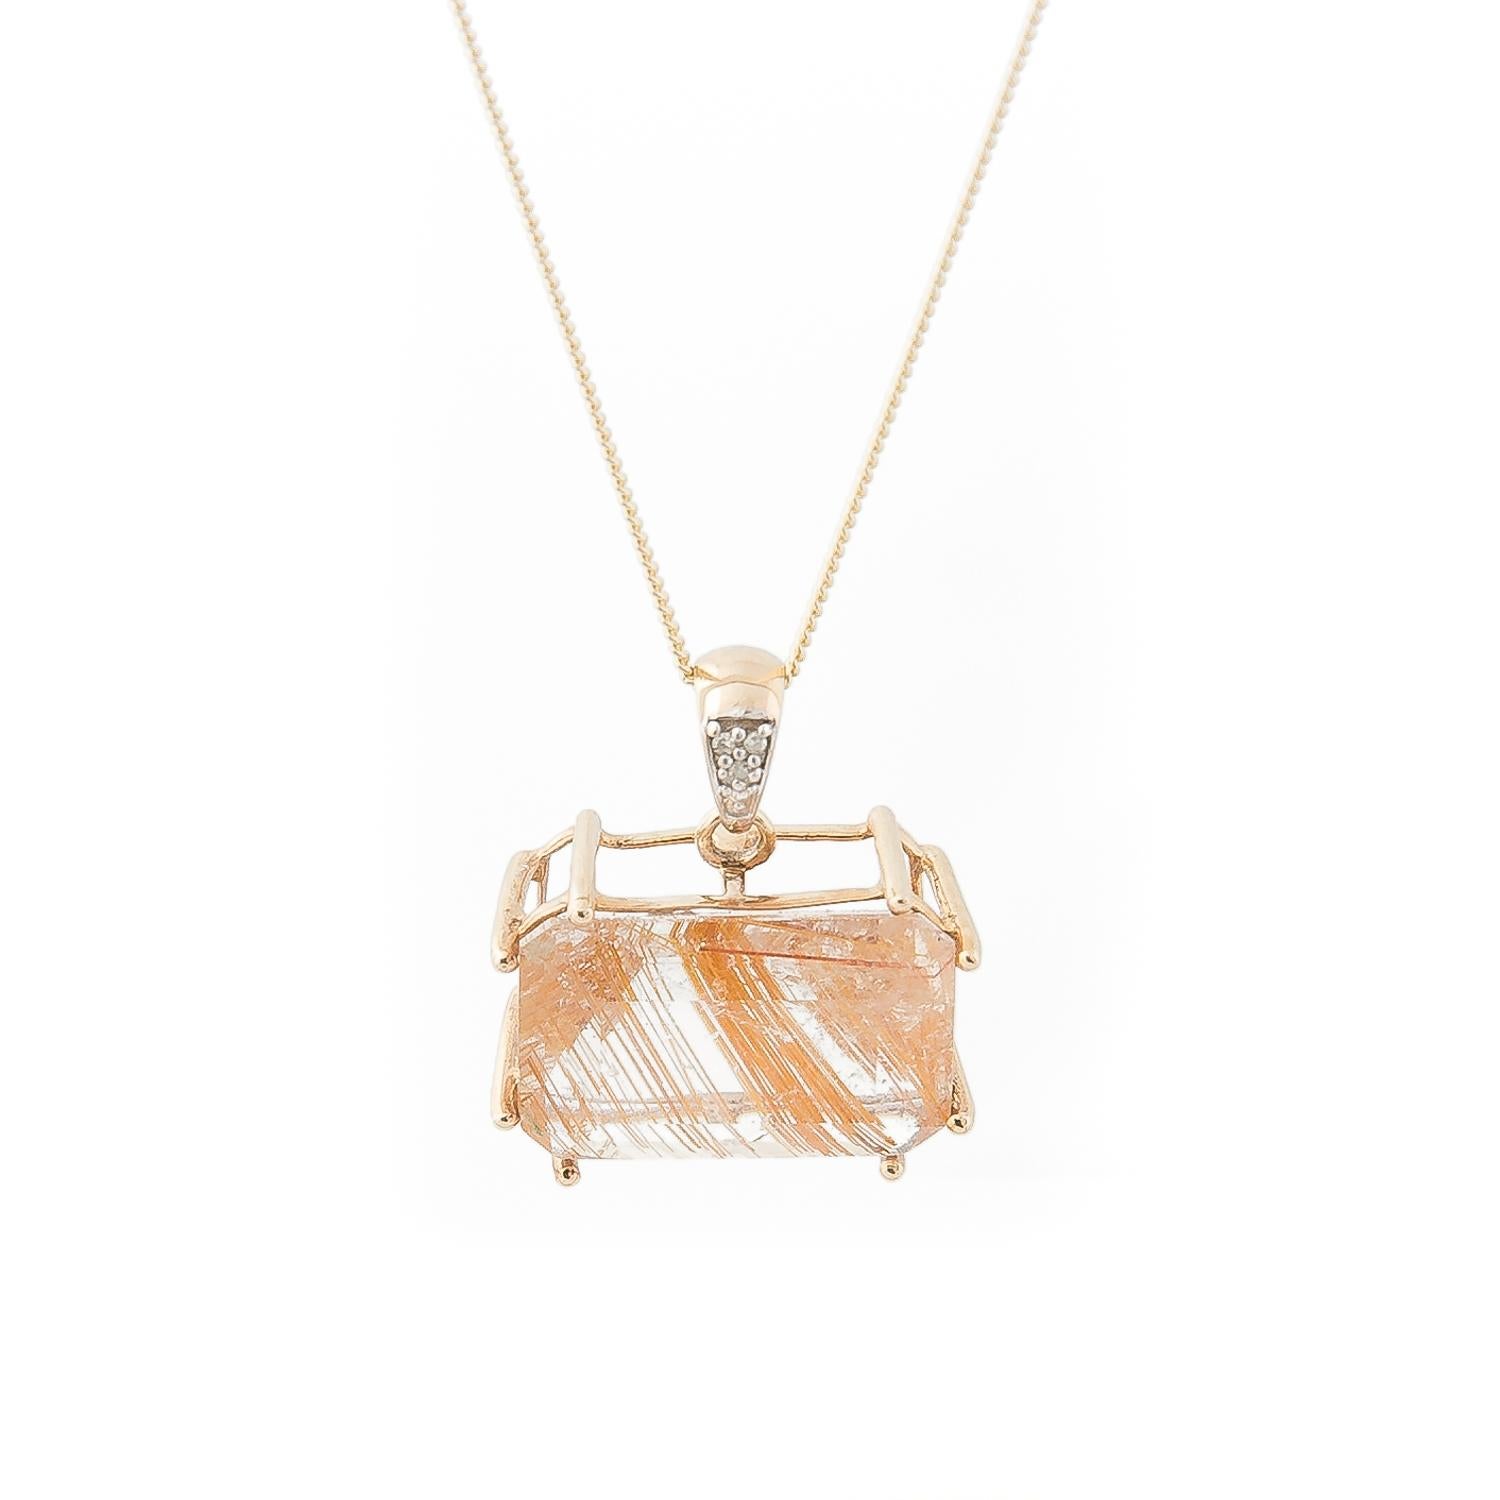 Vintage 9 K gold pendant with large emerald cut Rutilated Quartz in a horizontal basket setting, bail set with pave cut diamonds. Hallmarked Birmingham.

Rutilated quartz is a variety of quartz which contains acicular (needle-like) inclusions of